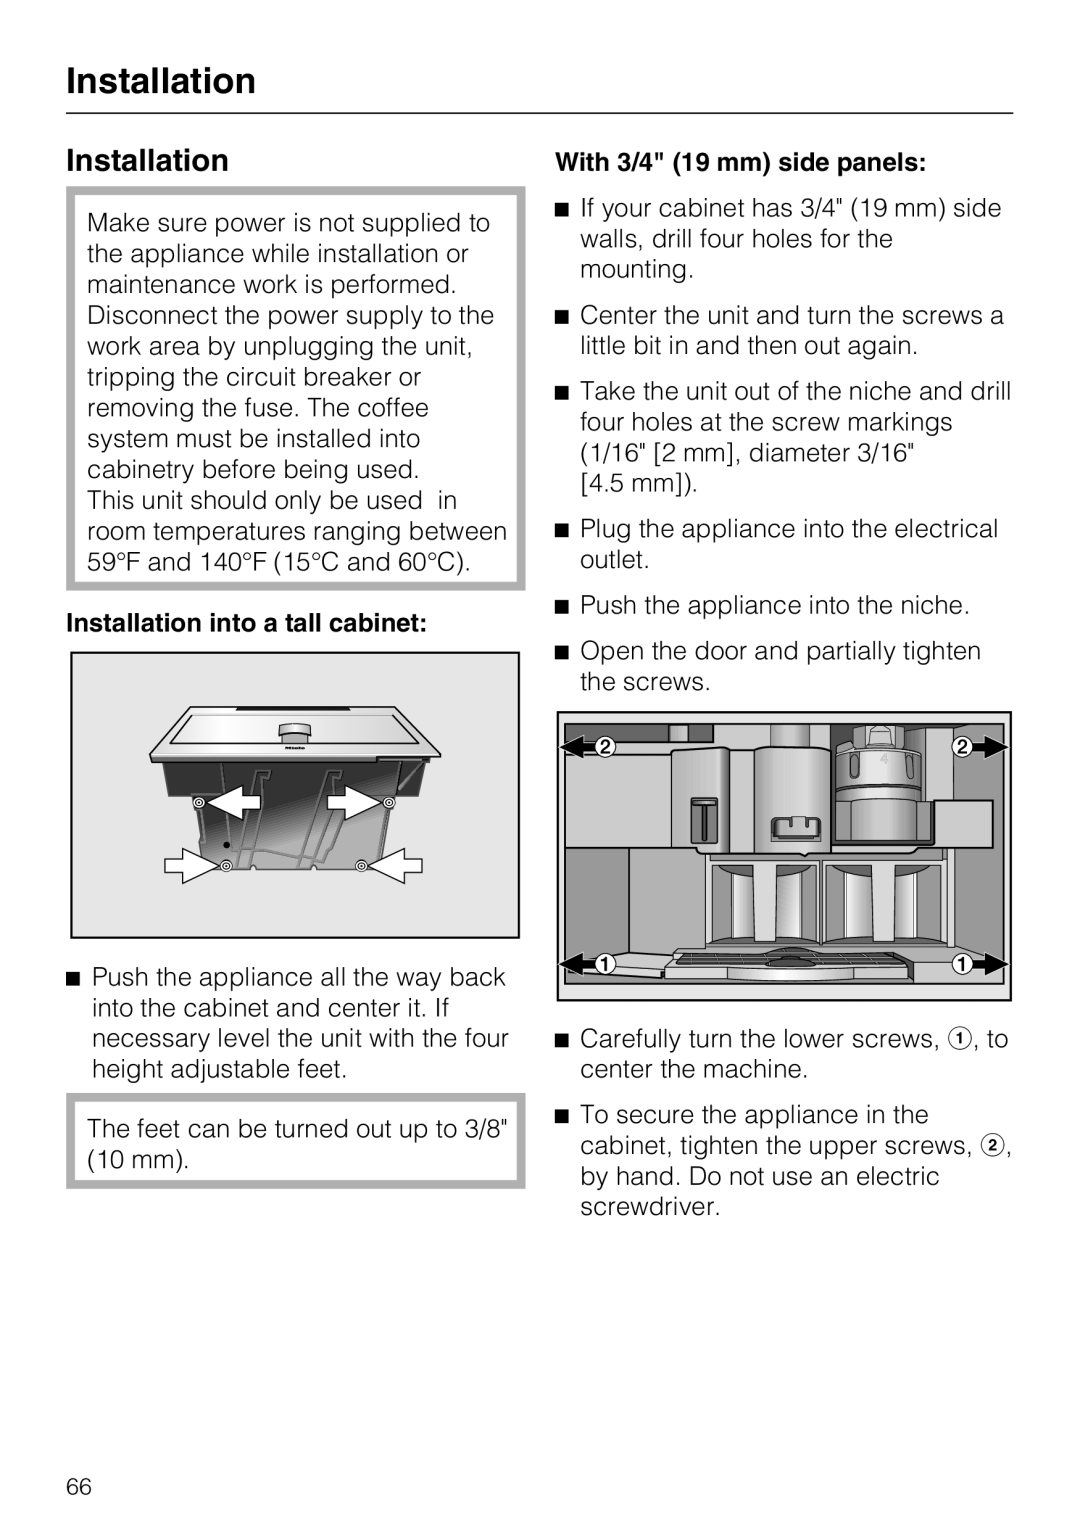 Miele CVA 2652 installation instructions Installation into a tall cabinet, With 3/4 19 mm side panels 